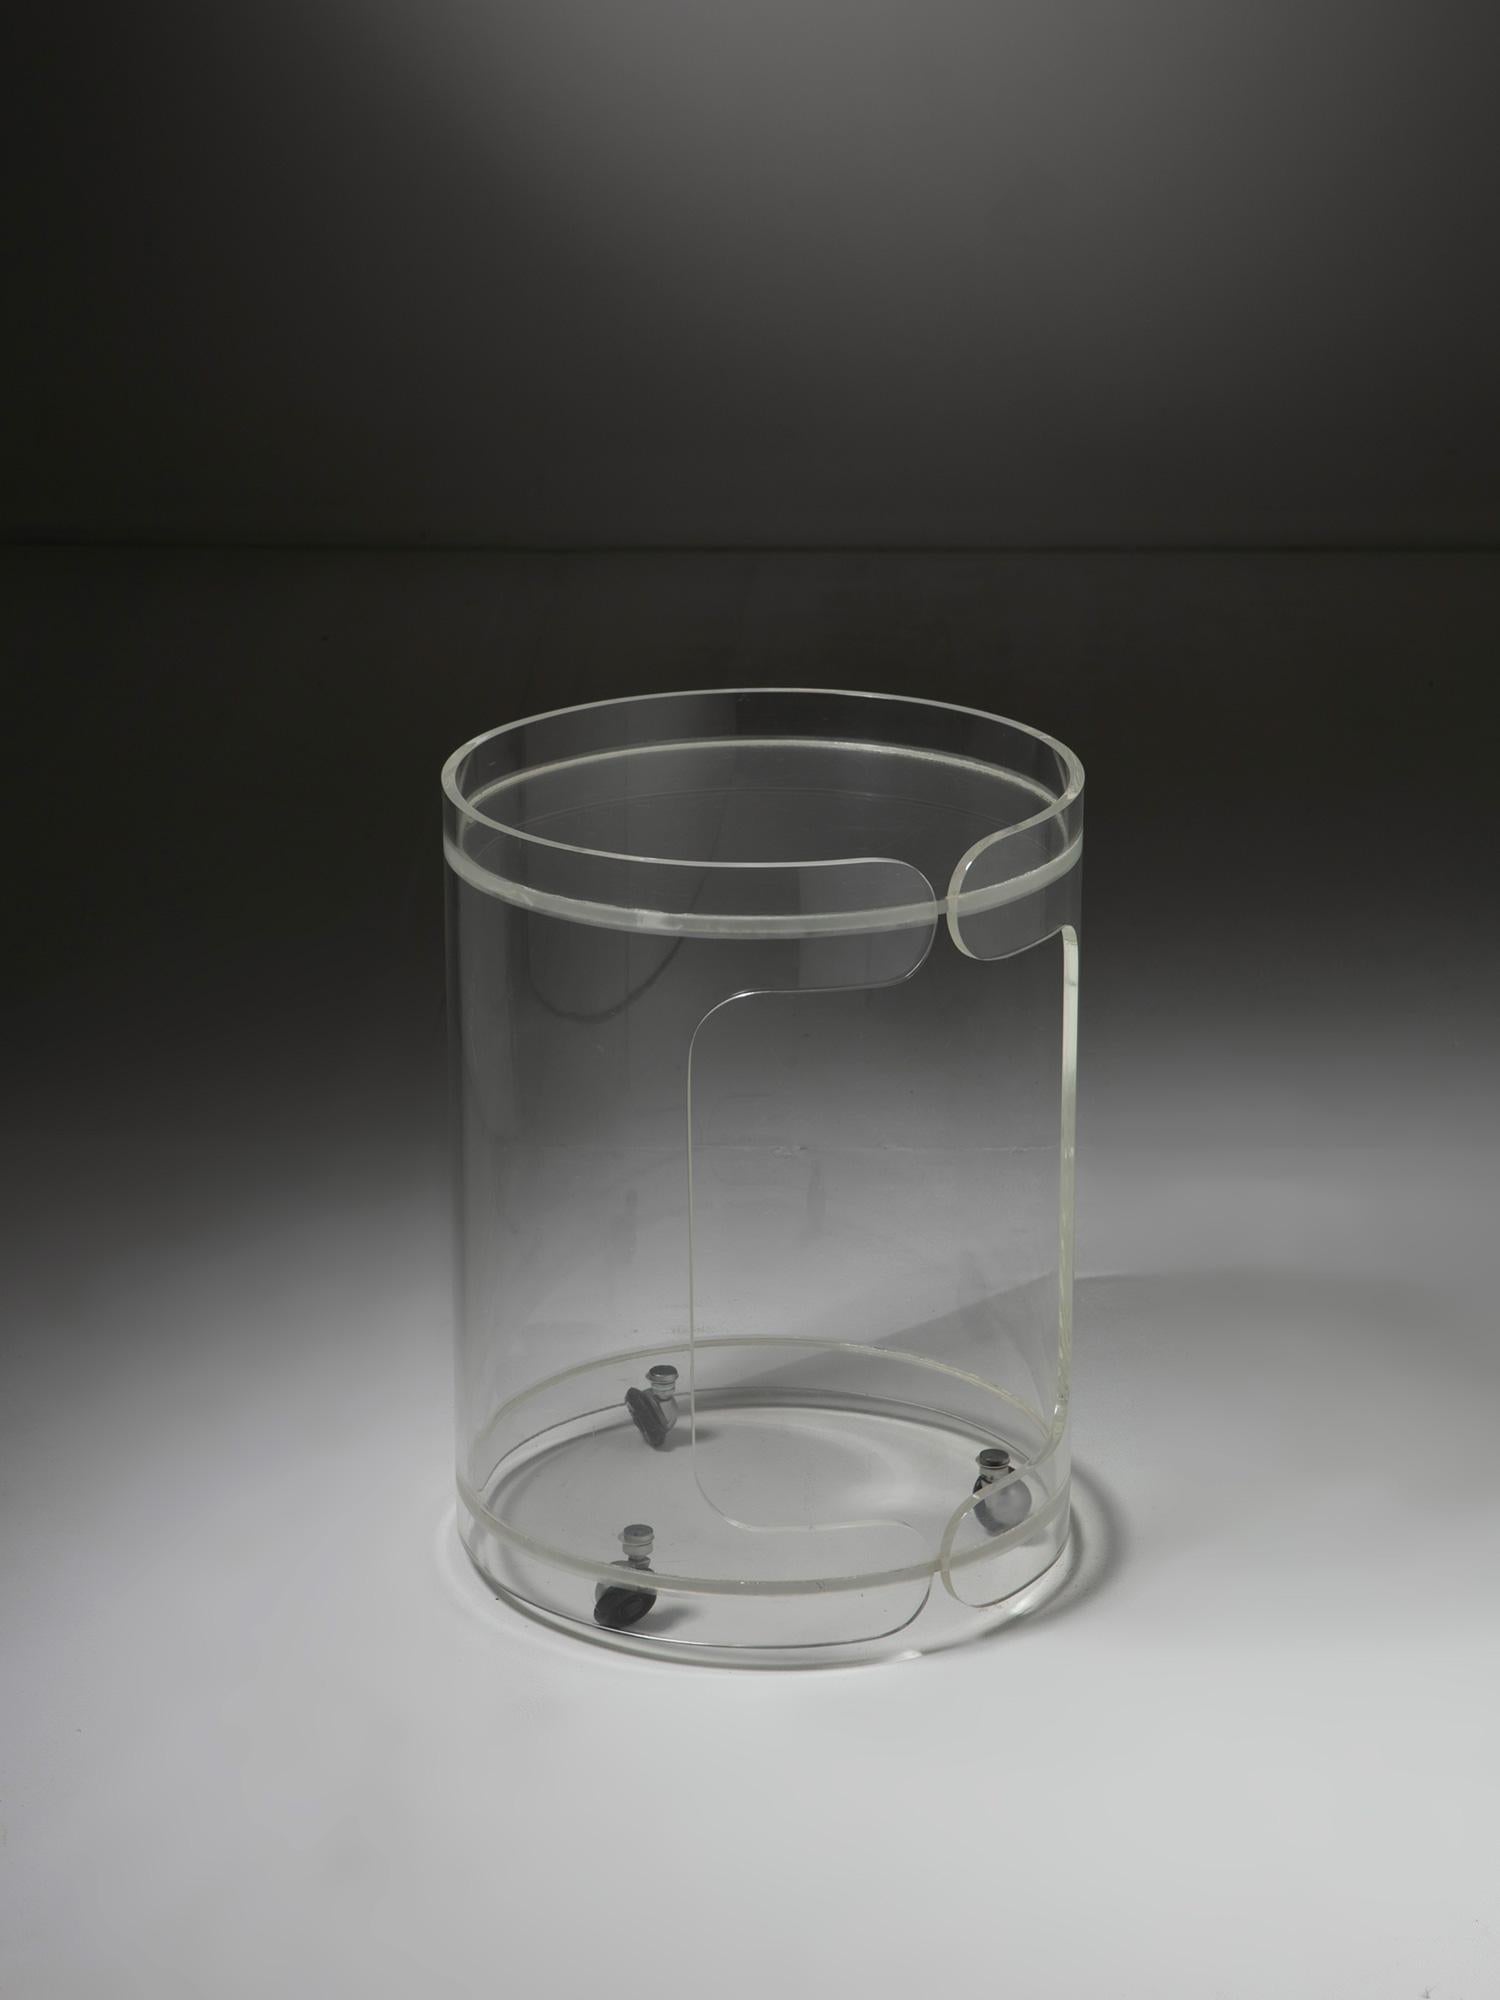 Completely transparent plexiglass dry bar.
Capable piece with round edges and wheels